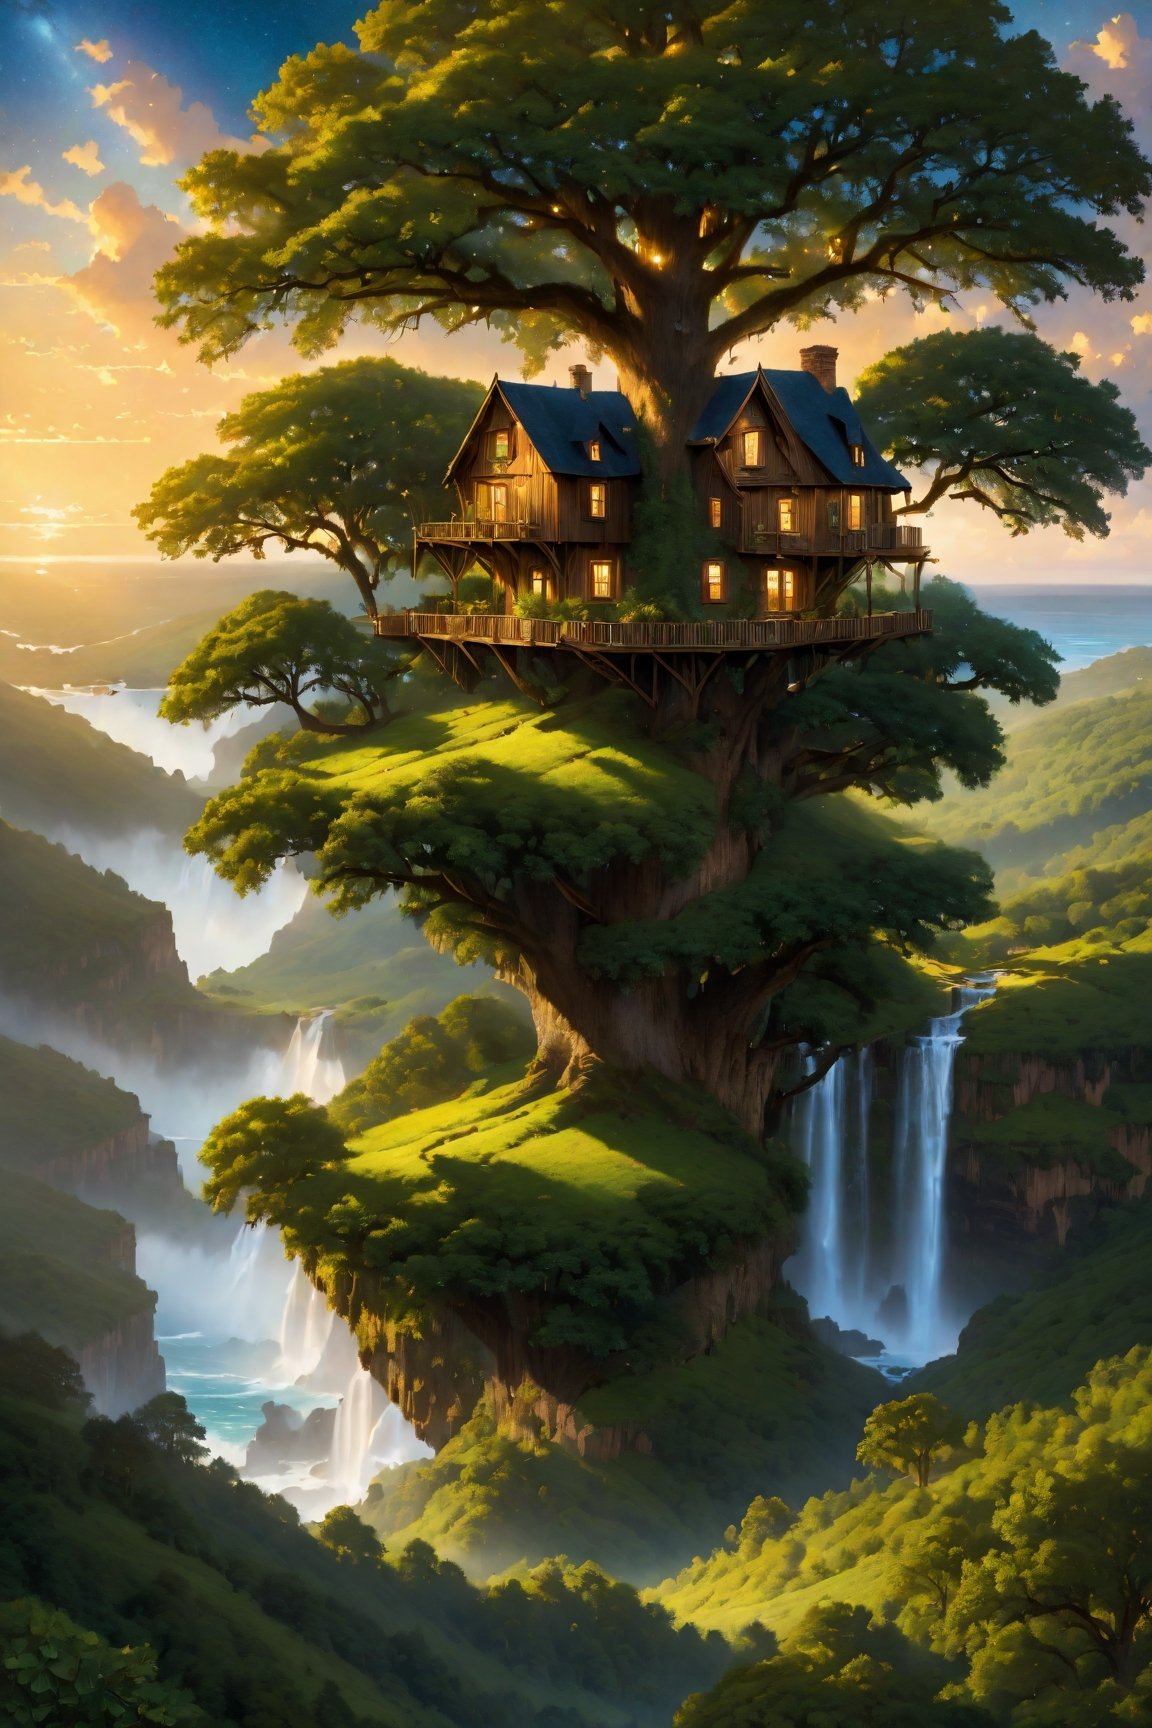 (wallpaper:1.2) ,best quality ,Ultra-detailed image of a (wallpaper:1.2) ,best quality Ultra-detailed image A majestic treehouse perched atop a towering oak tree, surrounded by lush foliage and a vibrant sky. Brown cat,waterfall, sea,EpicSky,greg rutkowski